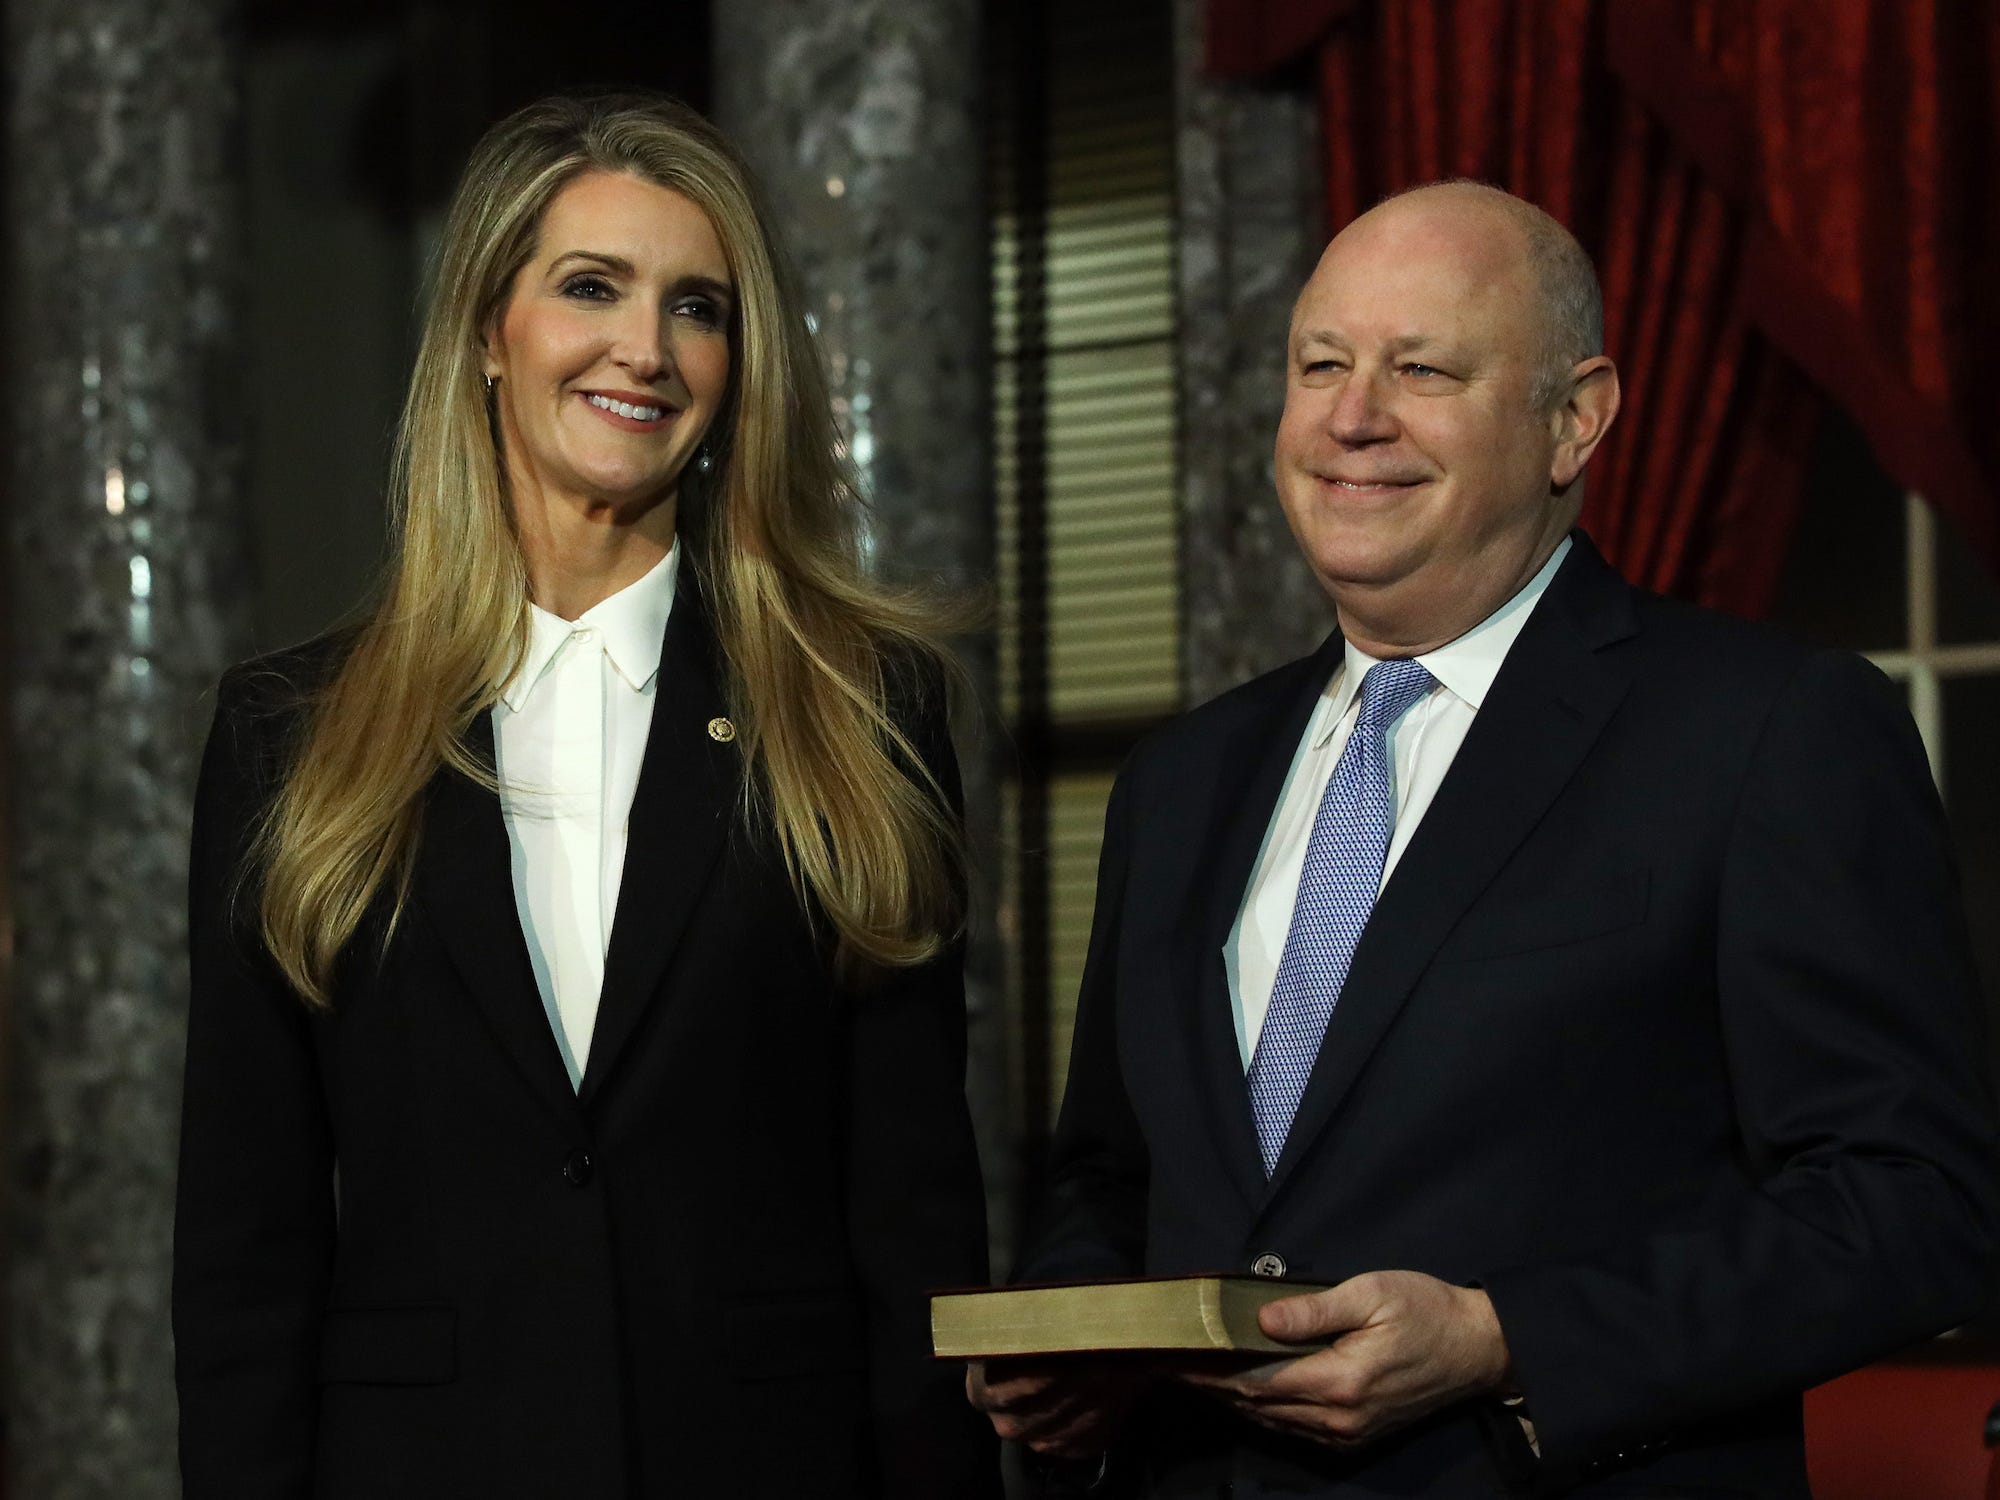 Then-Sen. Kelly Loeffler and her husband Jeff Sprecher at her ceremonial swearing-in at the Capitol in 2020.